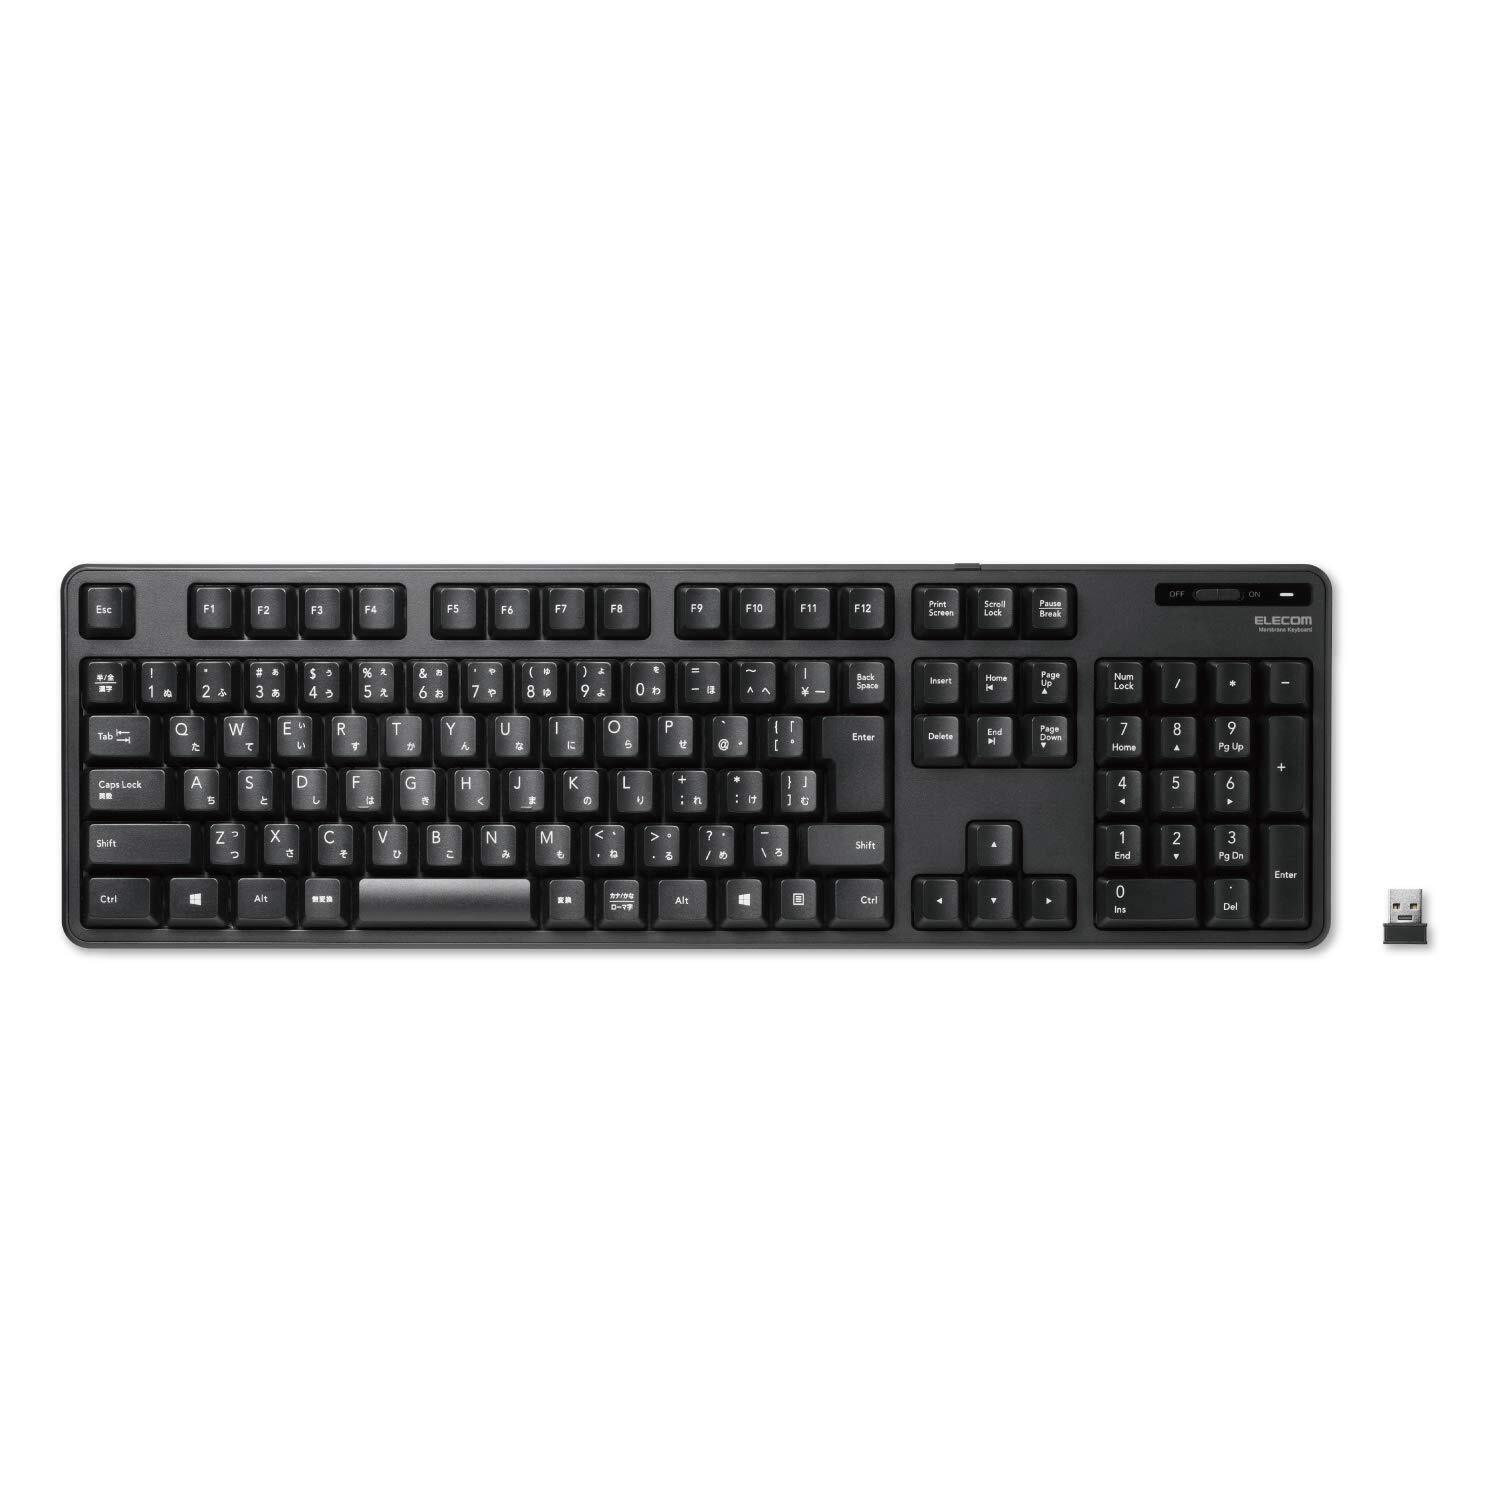 ELECOM Japanese Layout USB 2.4GHz Wireless Basic Keyboard for Computer and Lap